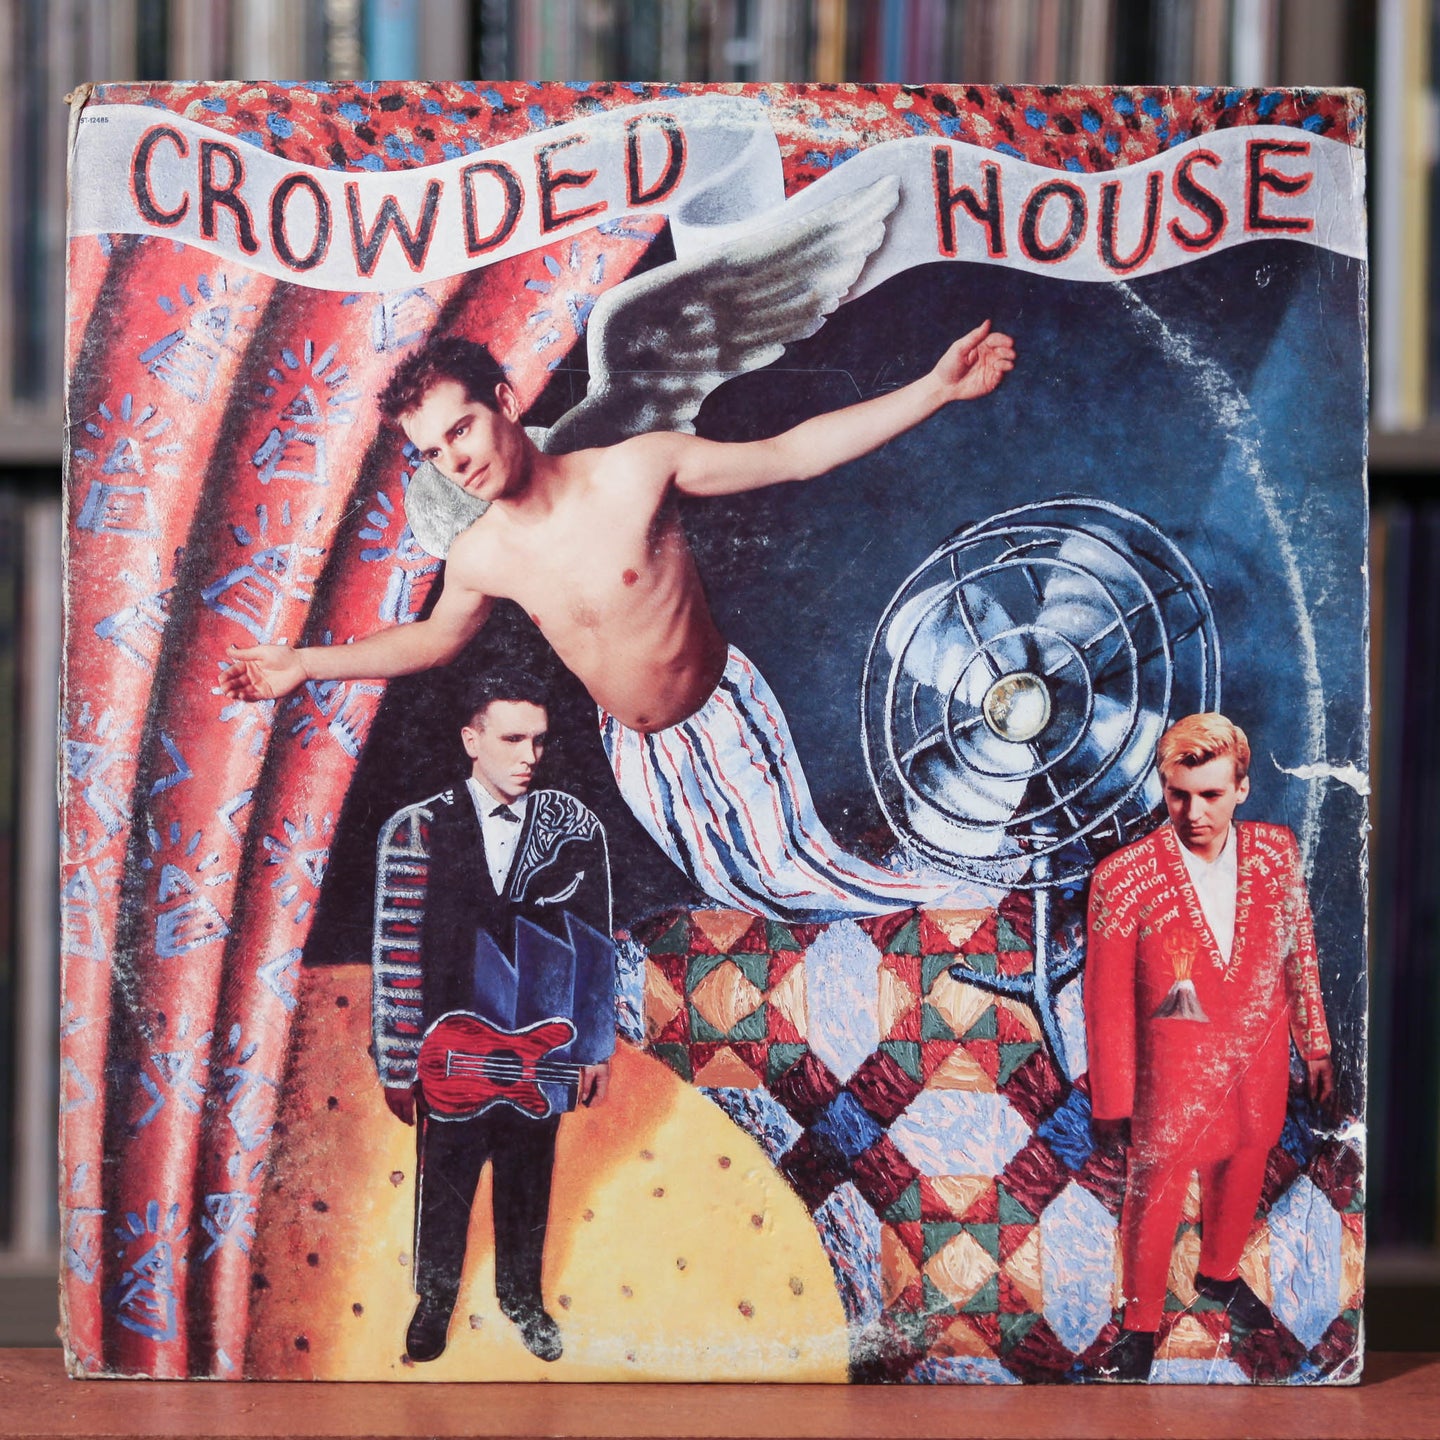 Crowded House - Self-Titled - 1986 Capitol